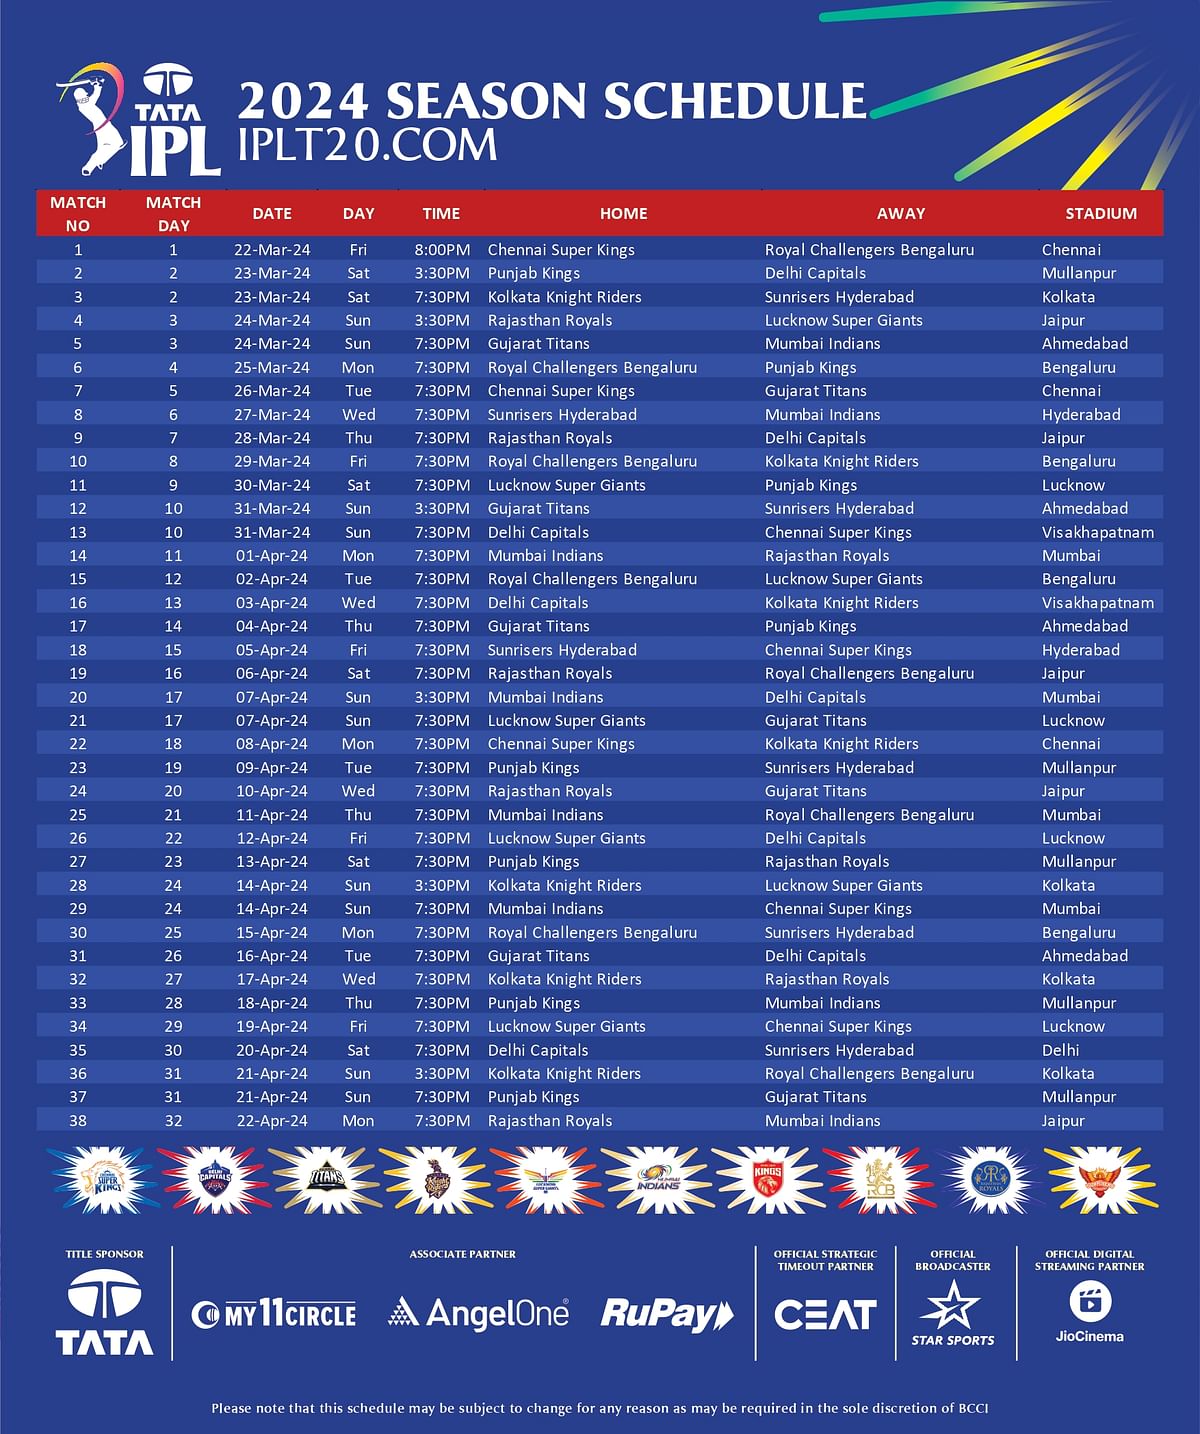 The full schedule of ongoing Indian Premier League has been released by BCCI. Check match dates, timings & venues.